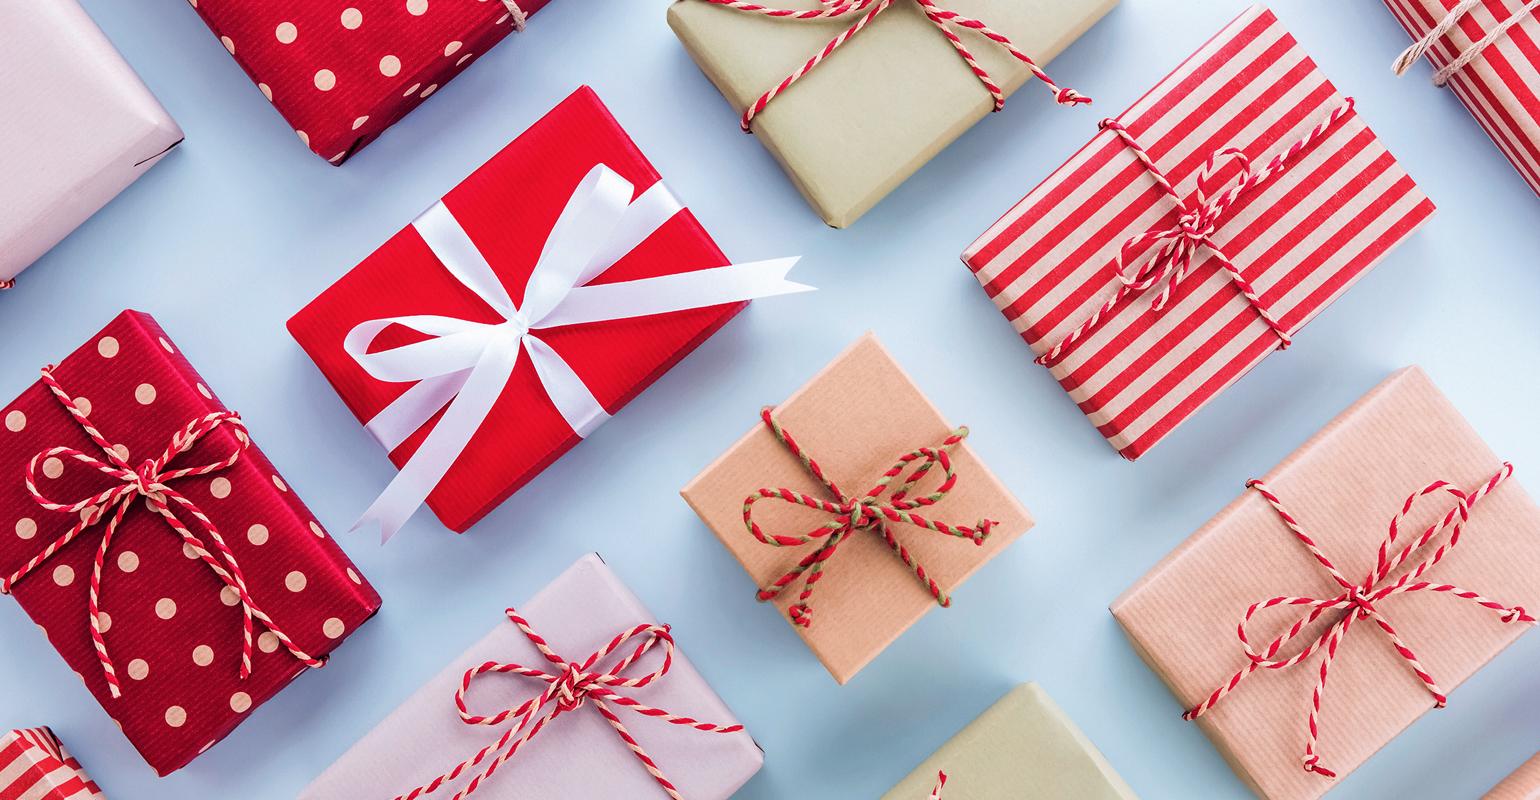 2018 Holiday Gift Guide  Great Gifts for Clients, Speakers